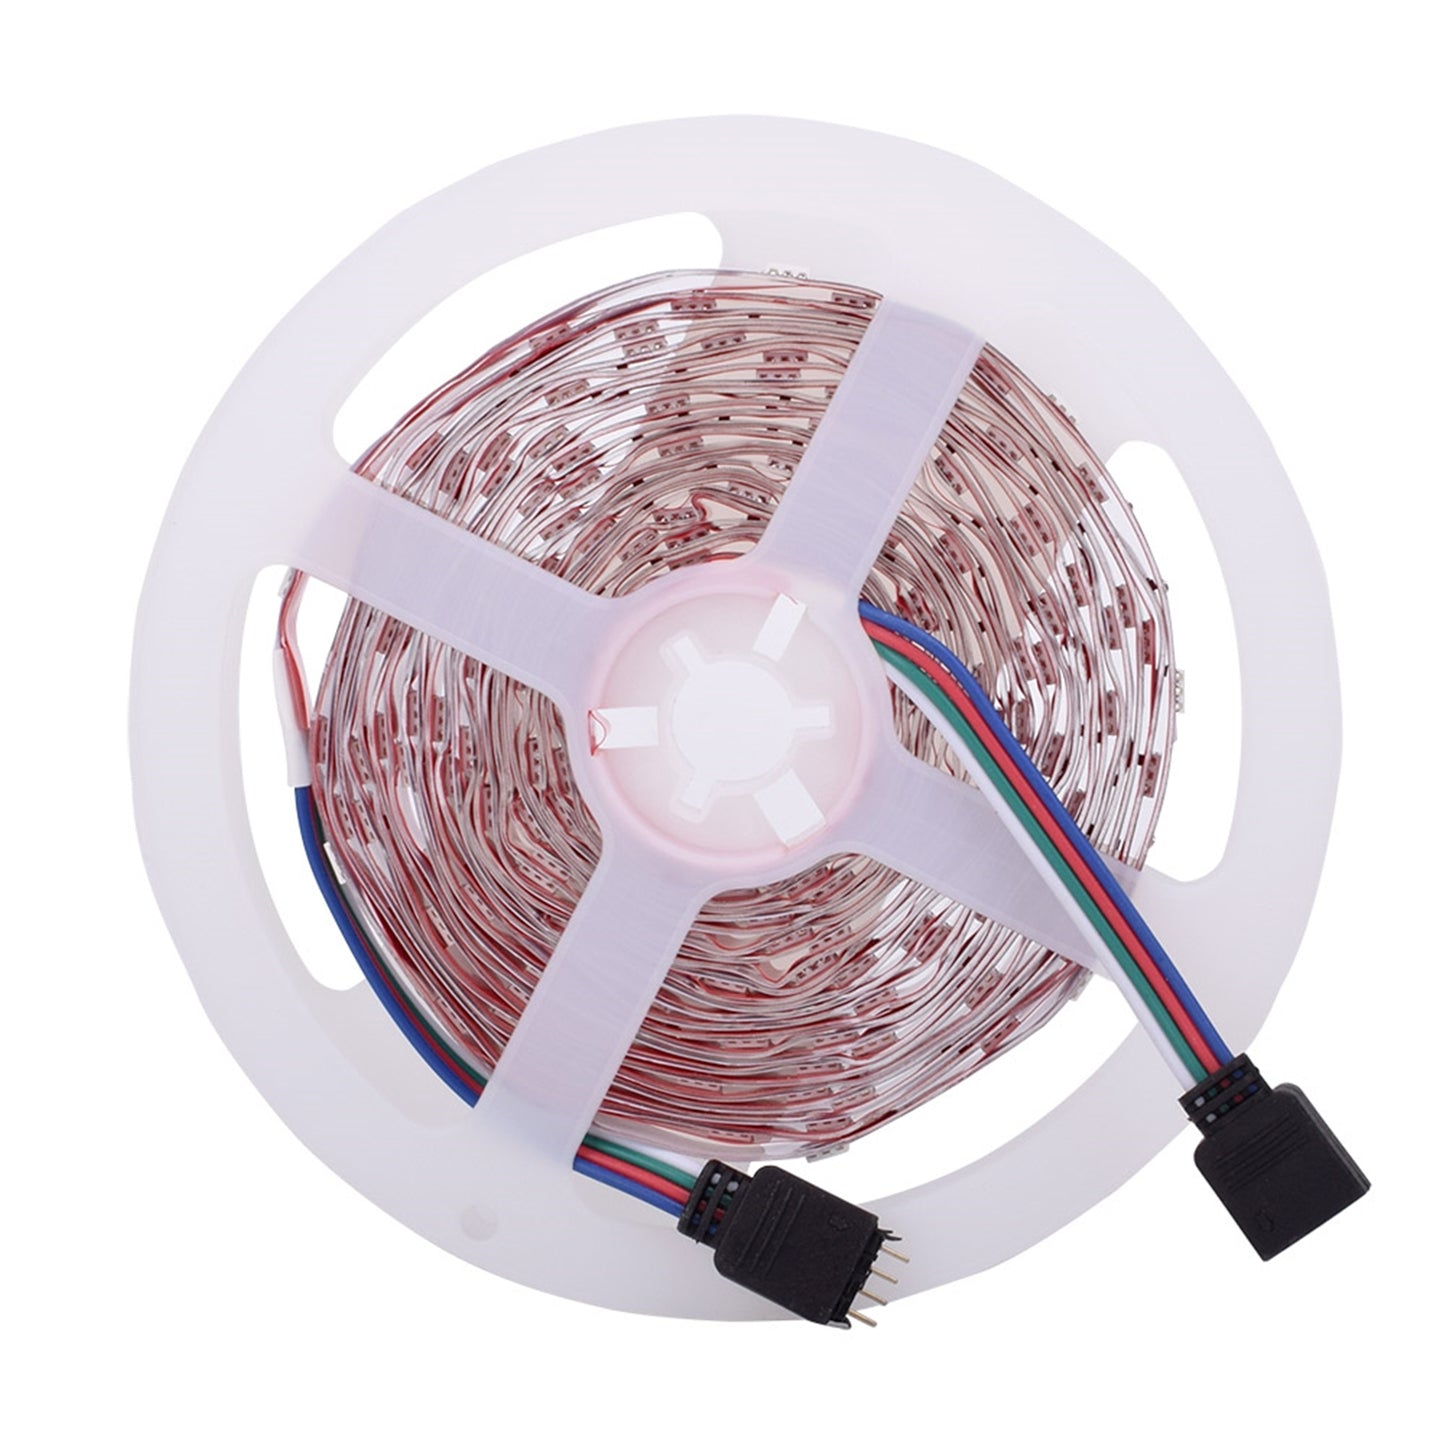 150-LED Light Strip with IR Remote | TechTonic® - Stringspeed